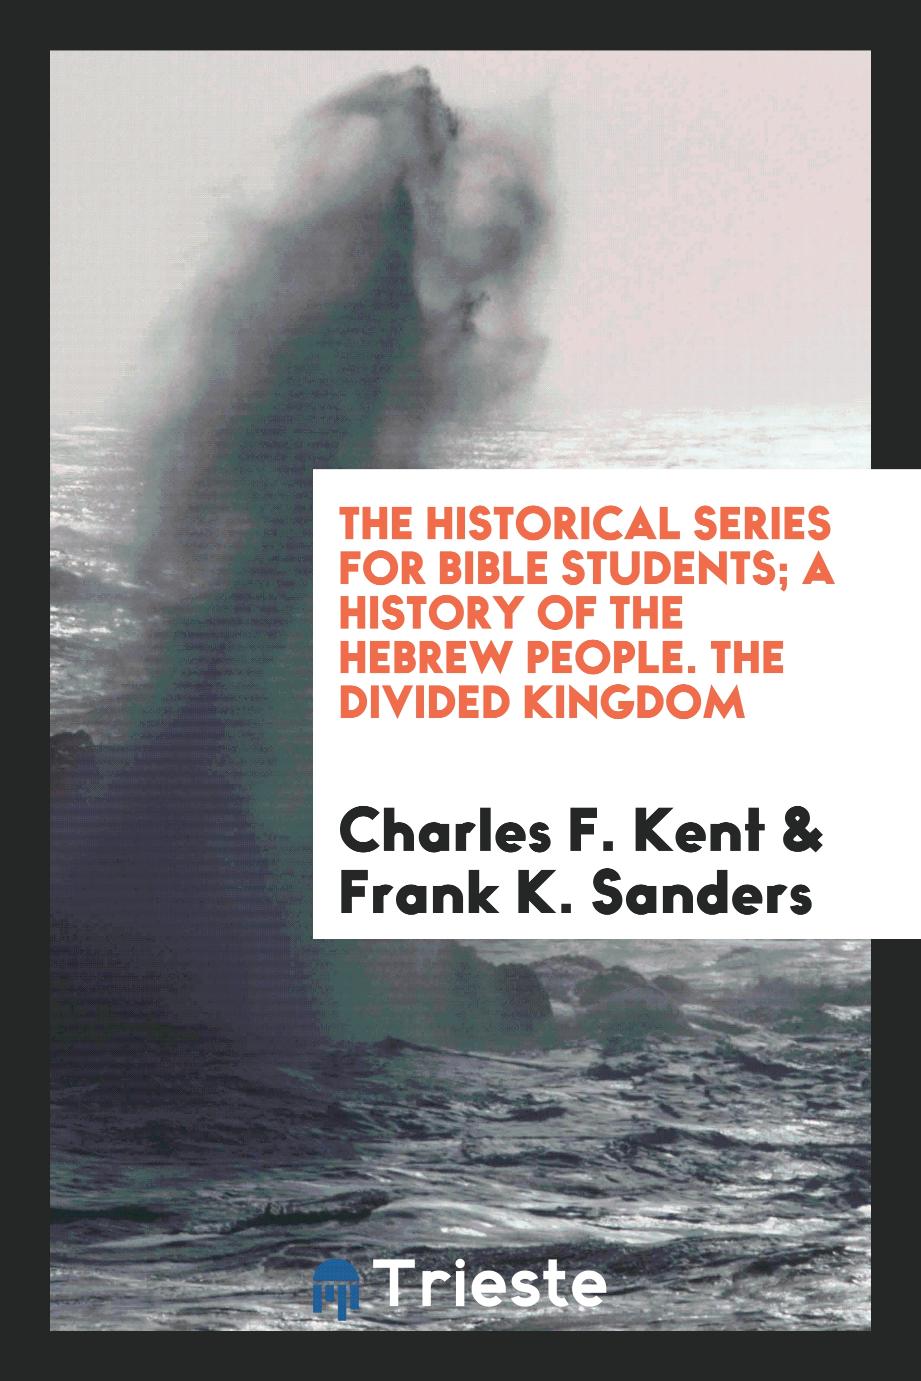 The Historical Series for Bible Students; A History of the Hebrew People. The Divided Kingdom